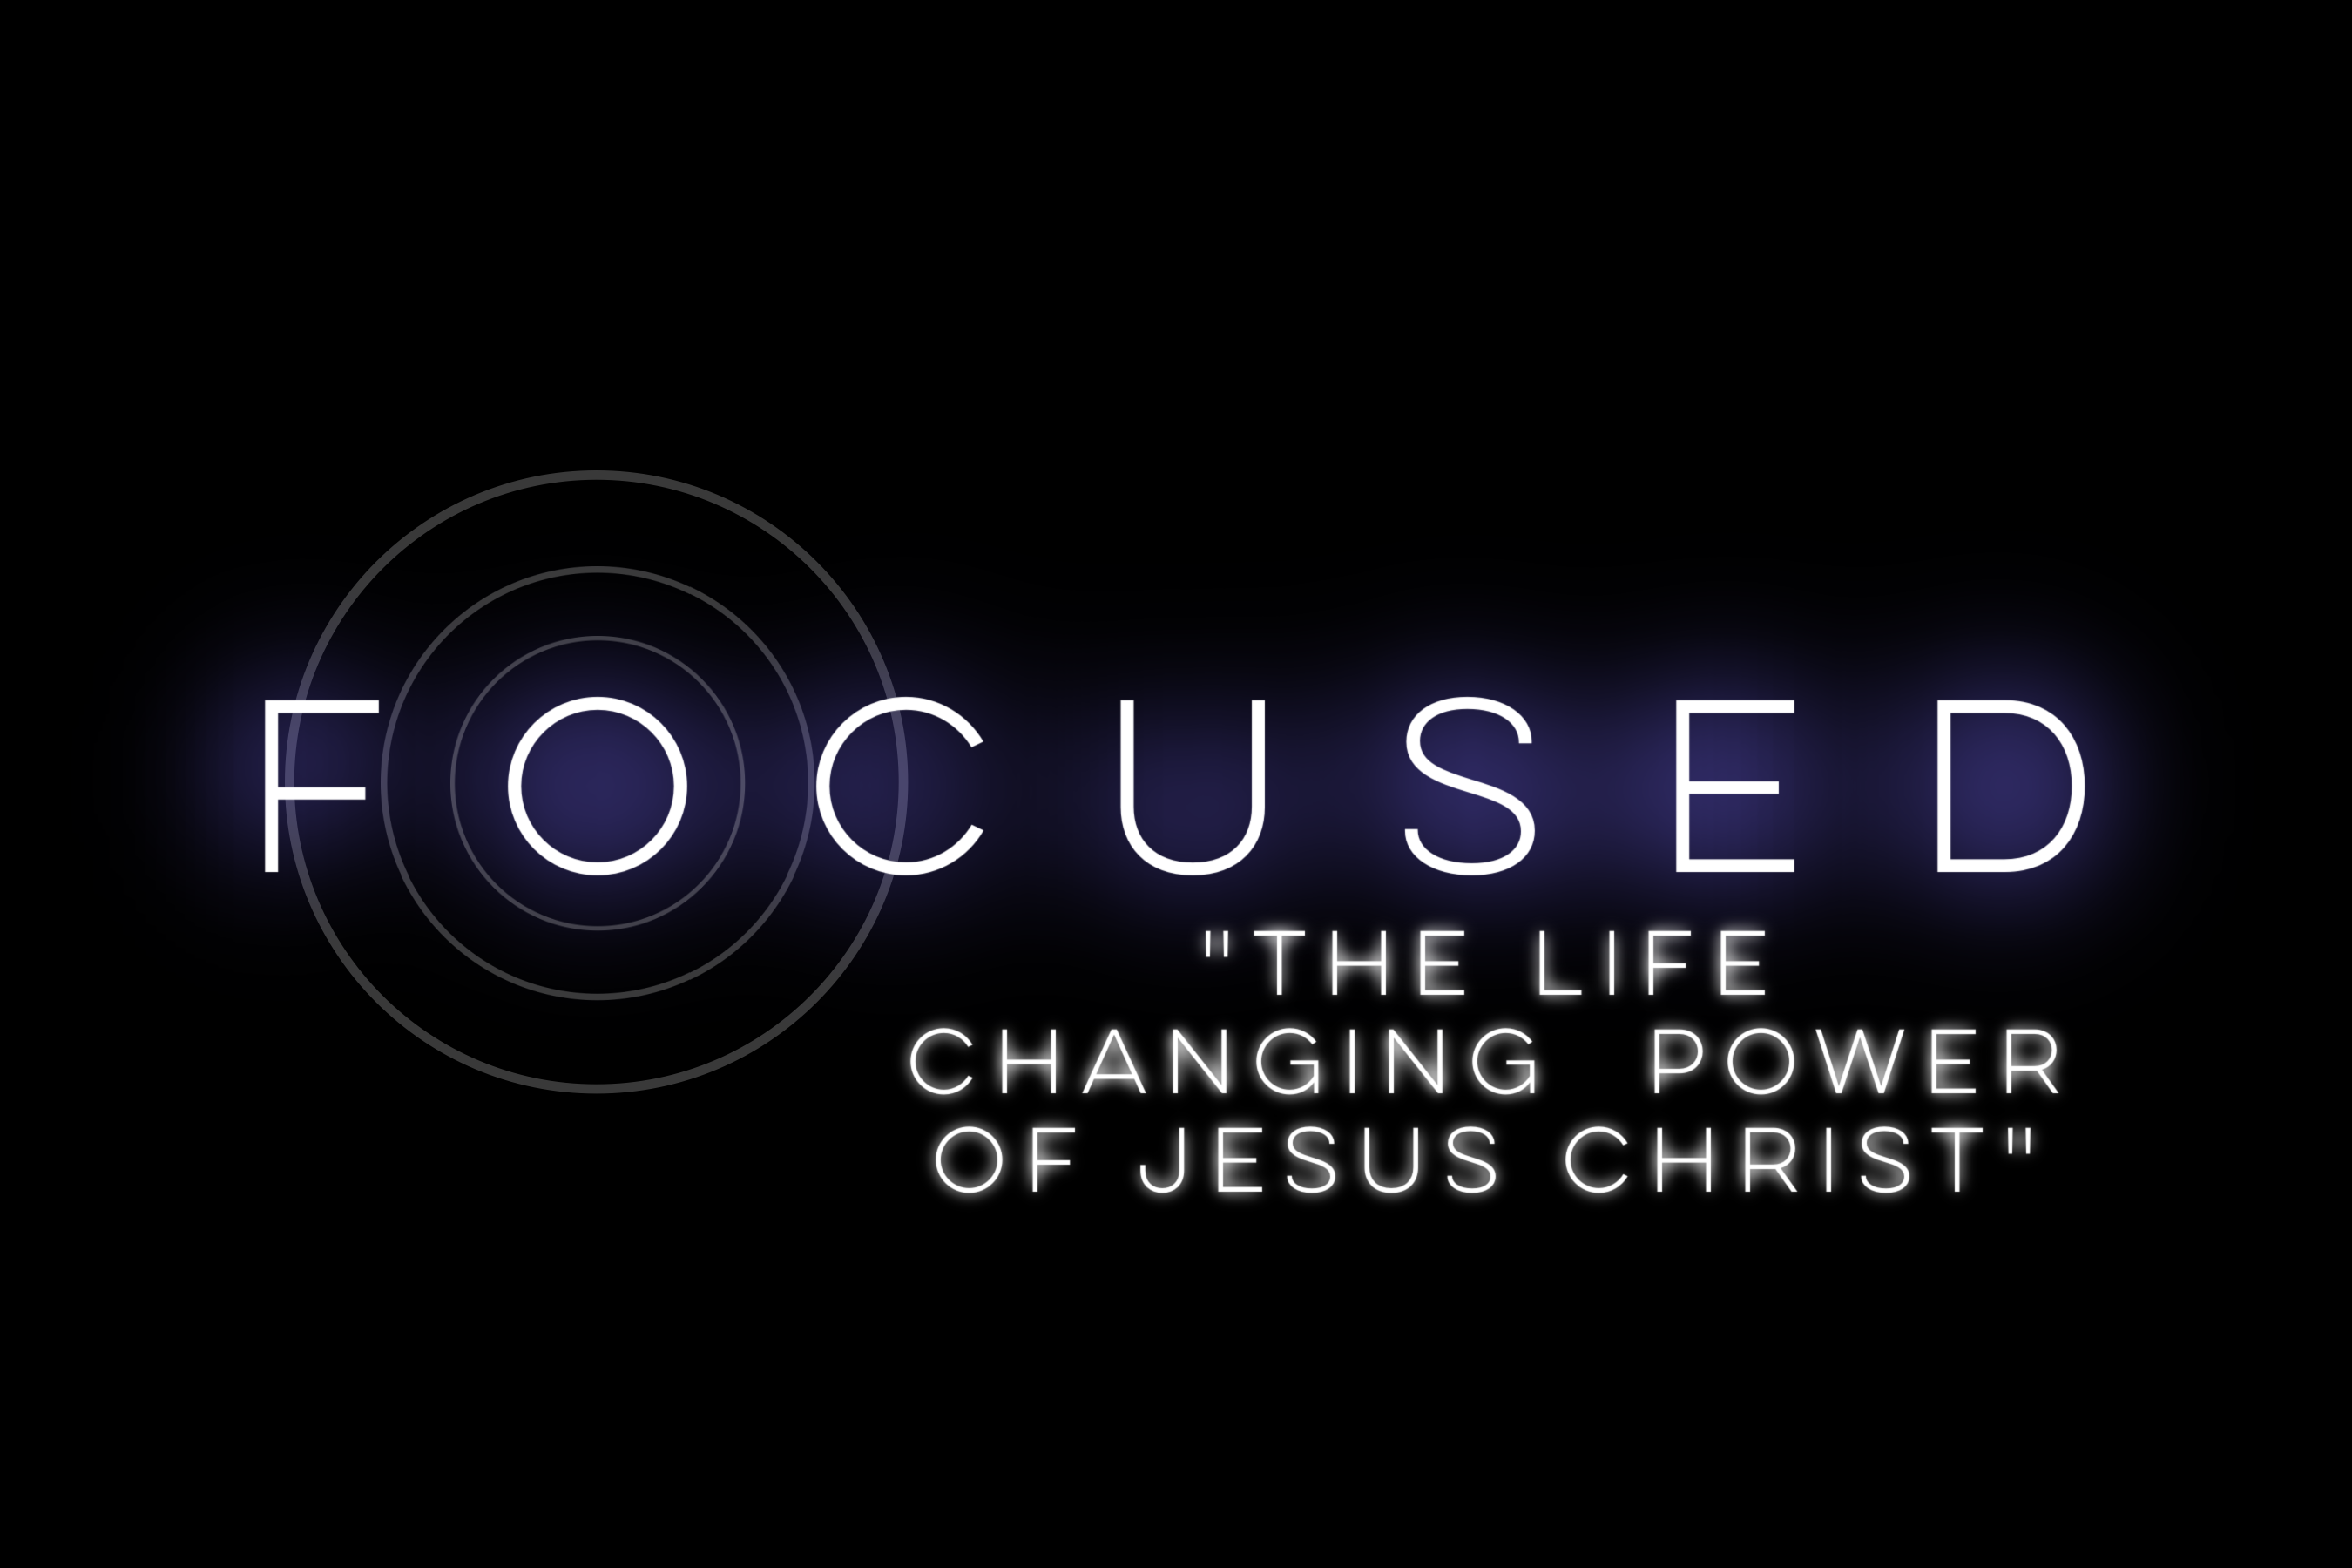 The Life Changing Power of Jesus Christ